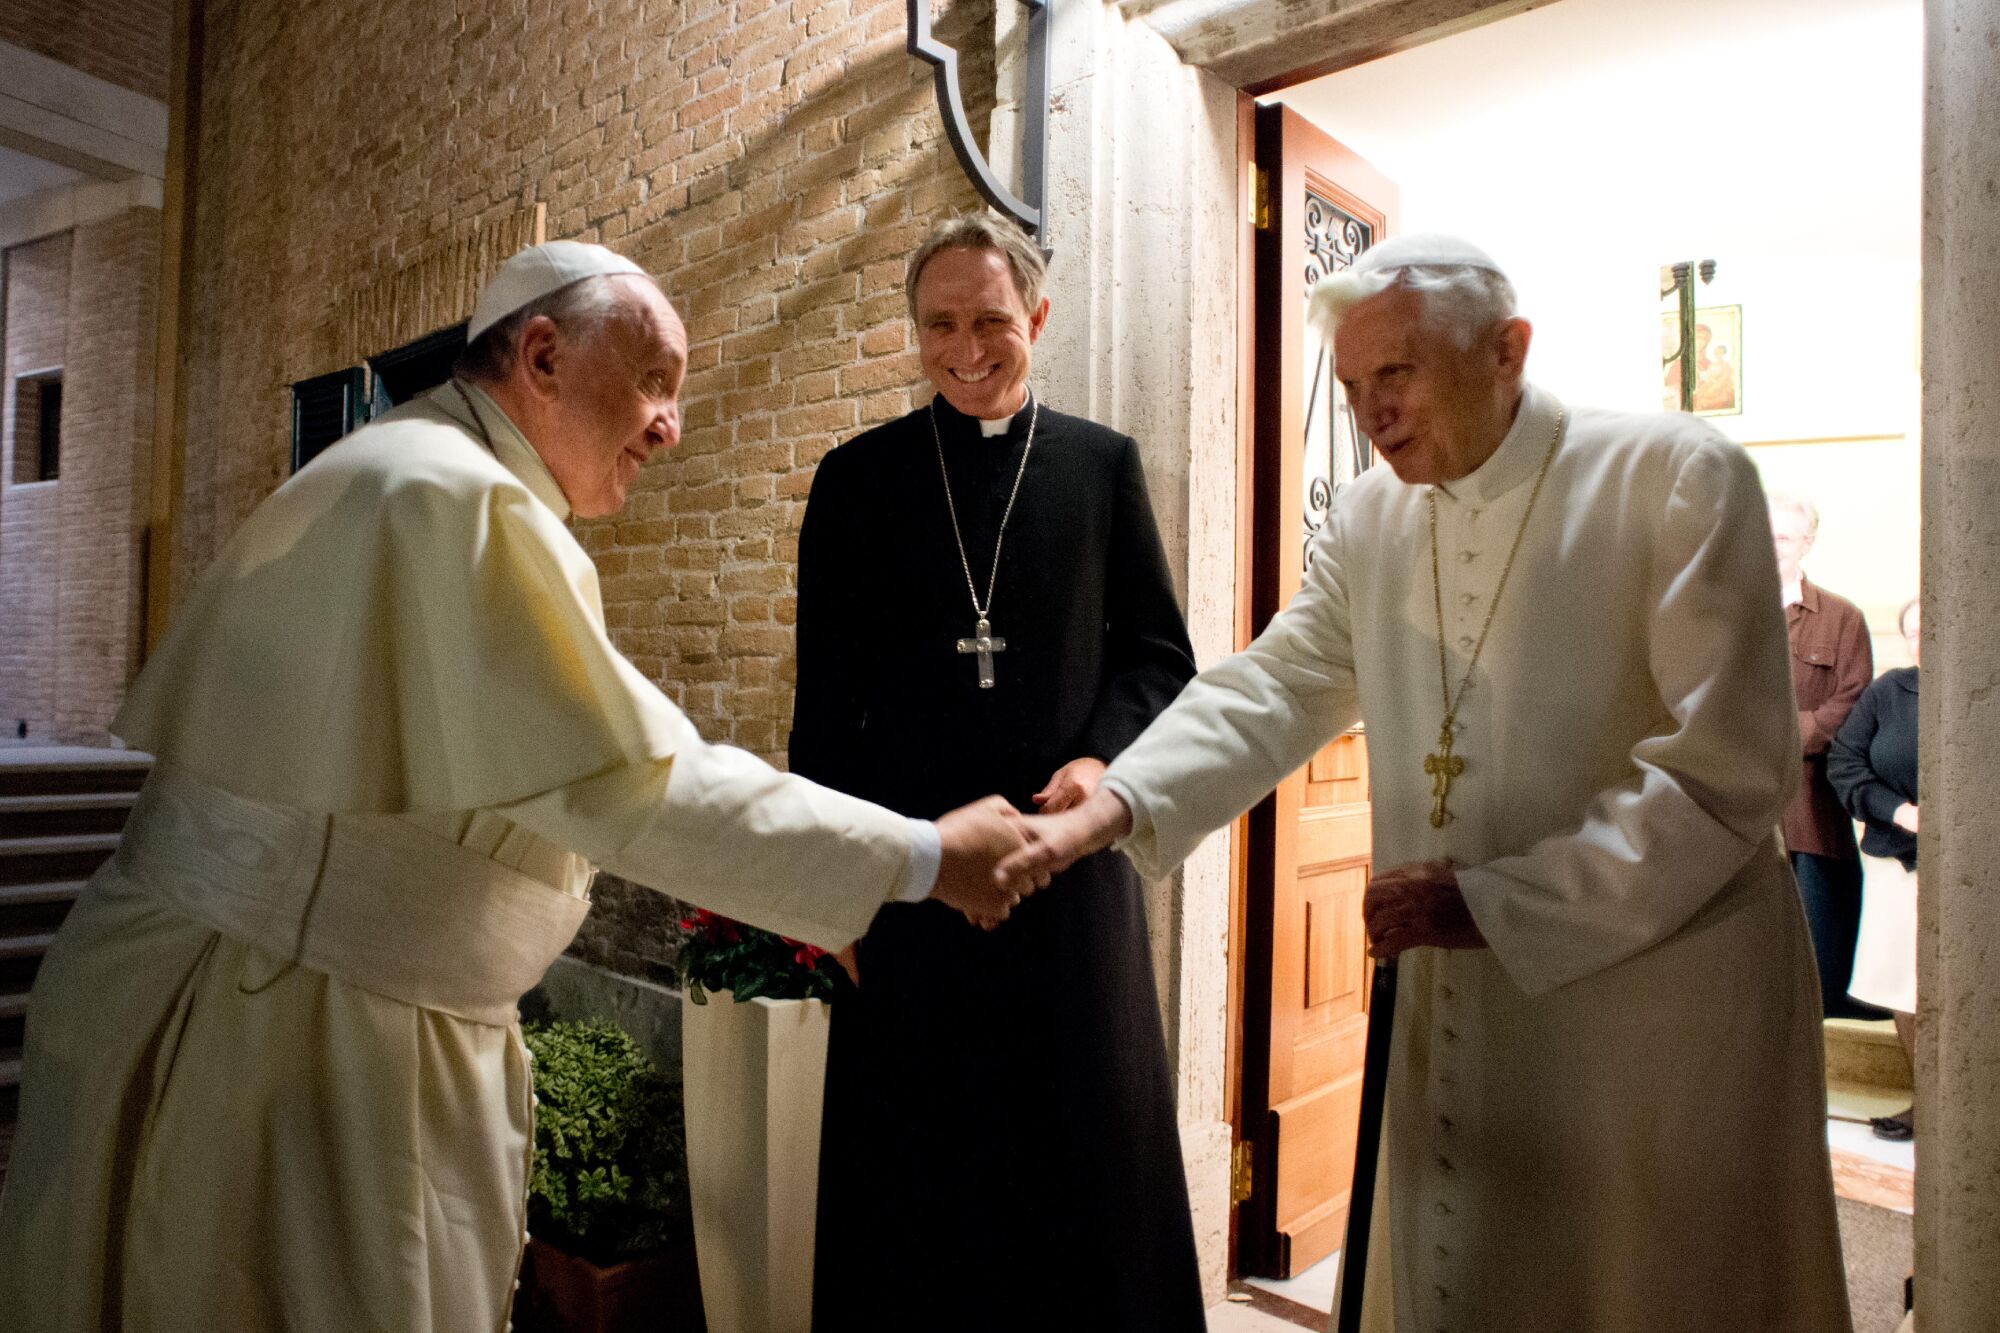 Pope Francis and Pope Emeritus Benedict XVI.  shake hands while a priest looks on.